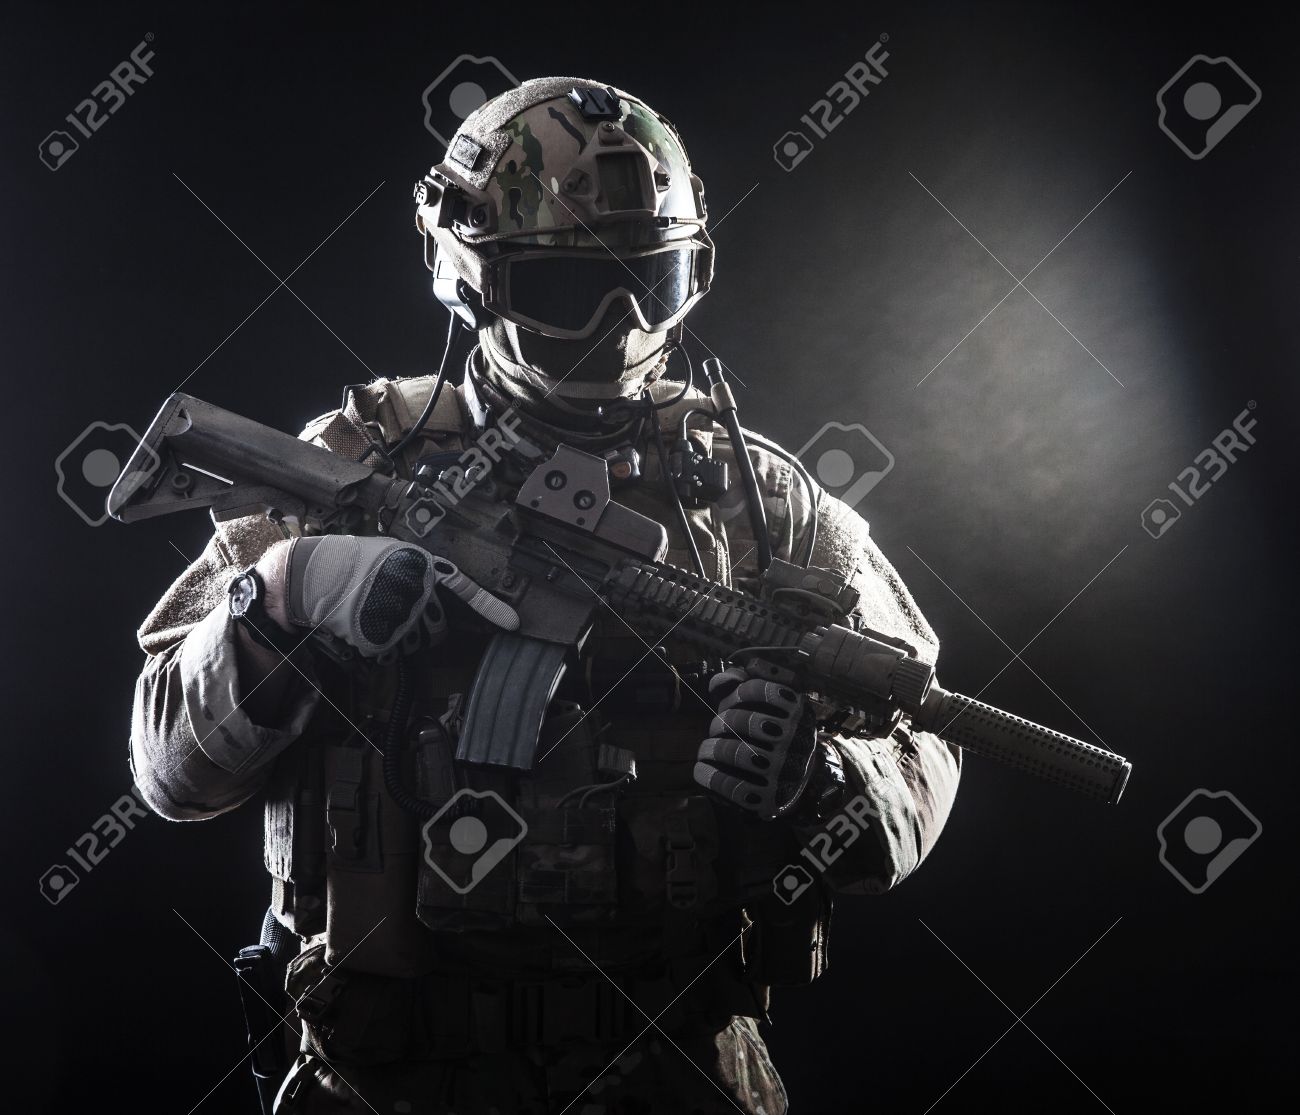 Special Forces Soldier With Rifle On Dark Background Stock Photo